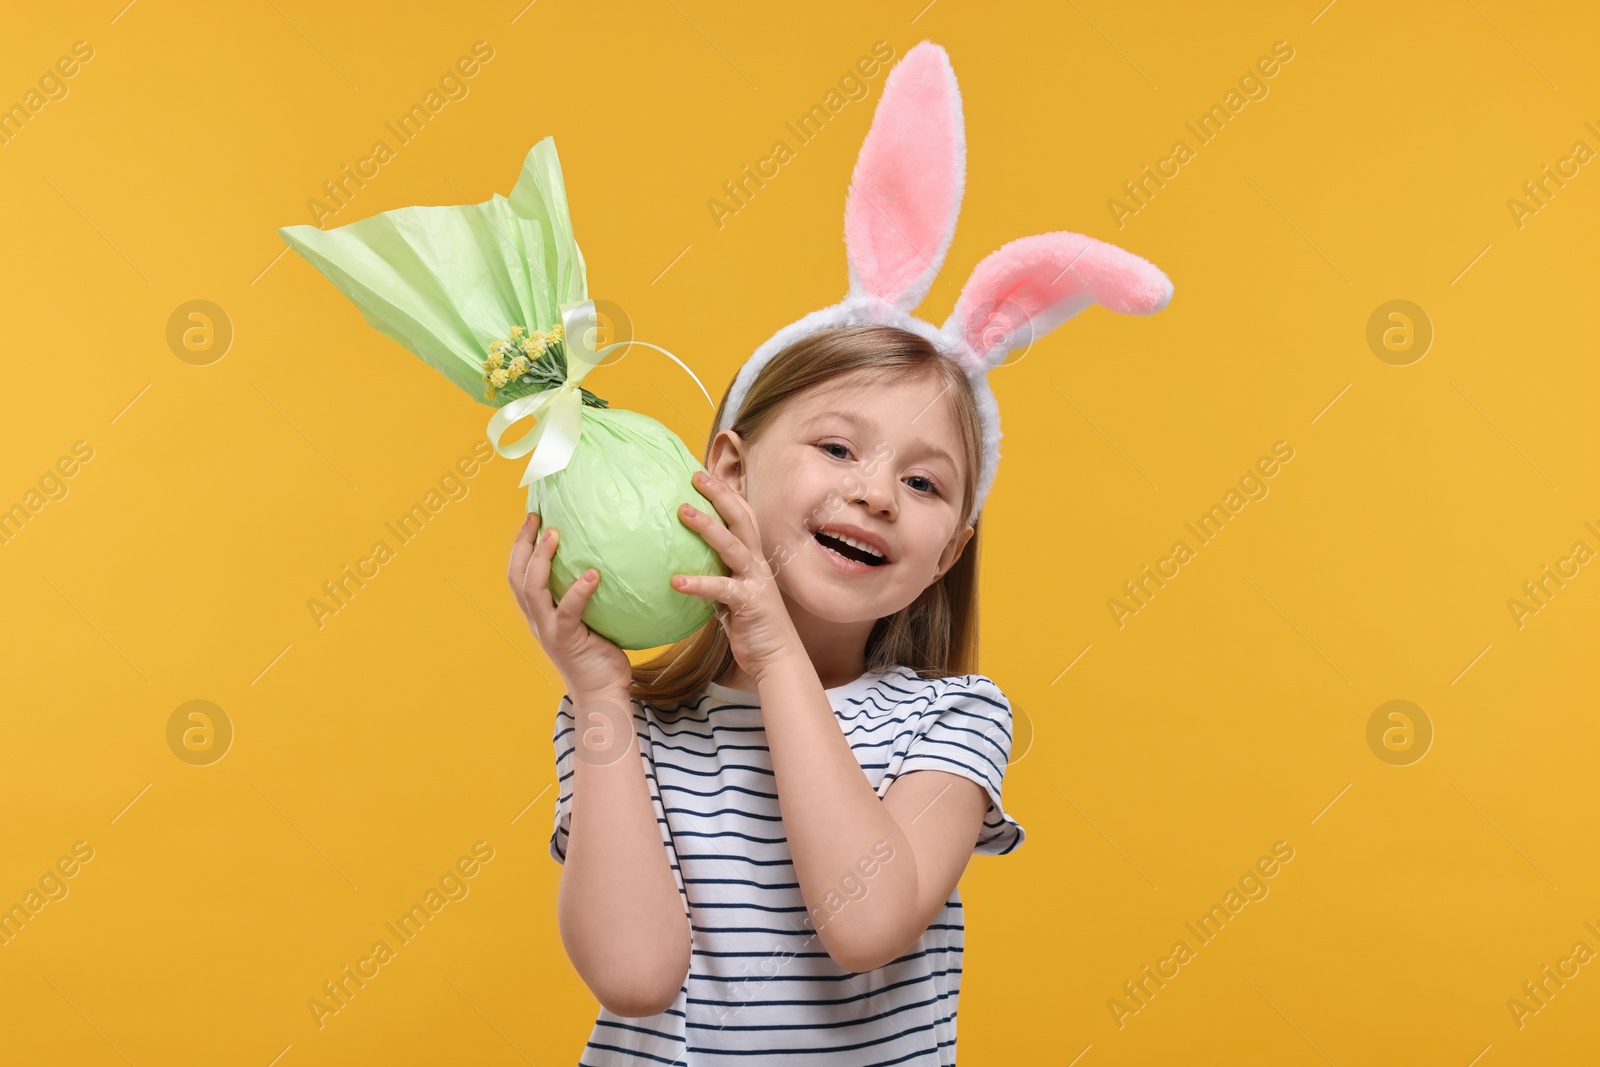 Photo of Easter celebration. Cute girl with bunny ears holding wrapped gift on orange background